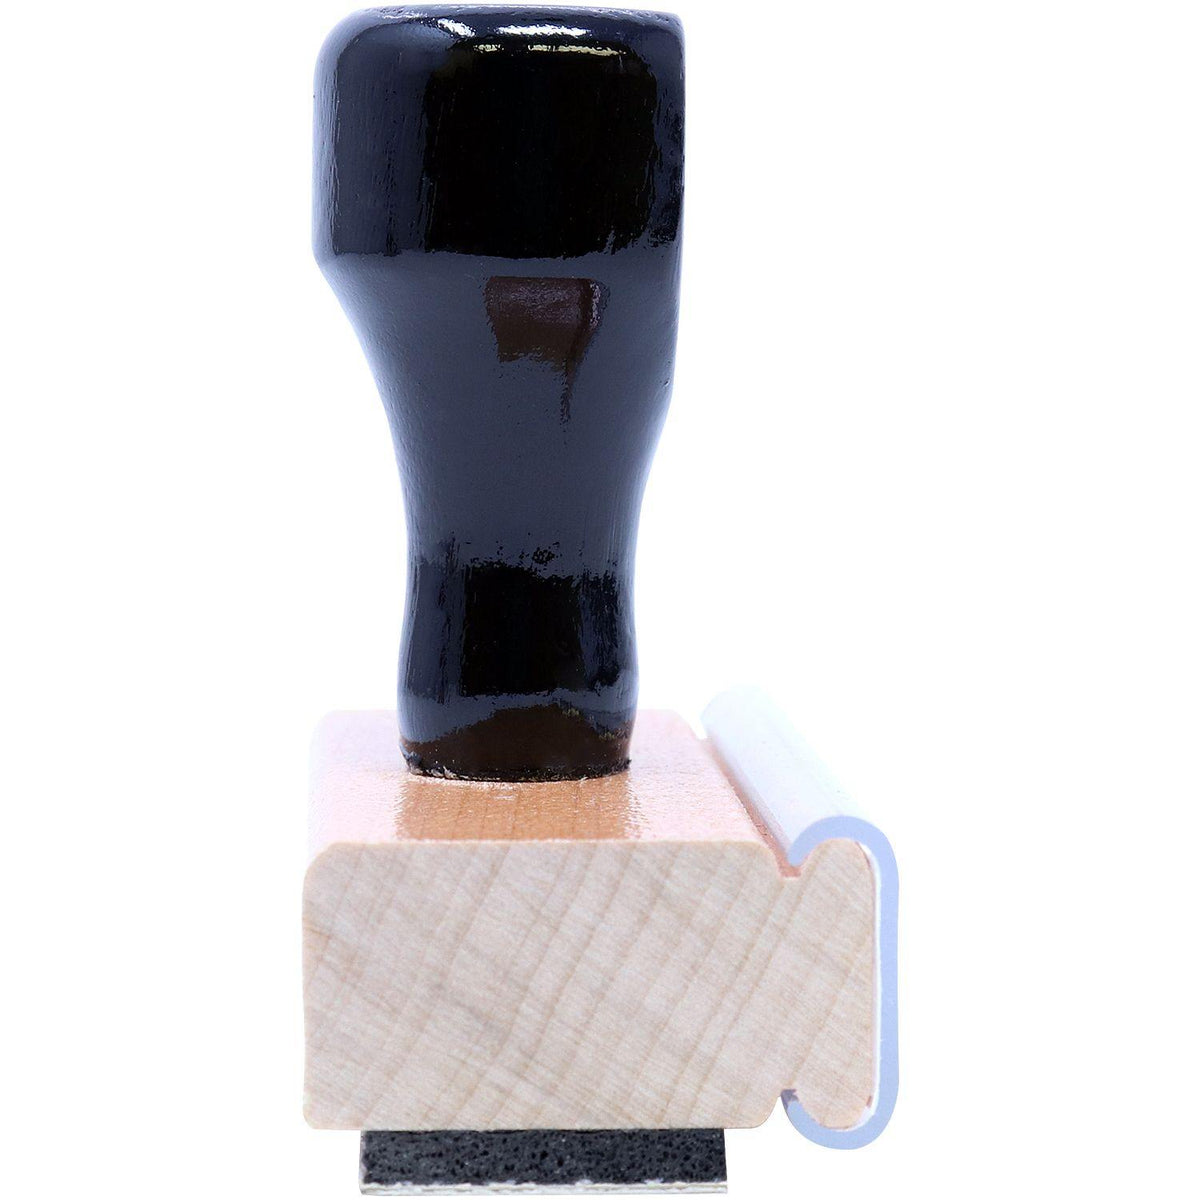 Side View of Large Correct And Hand Back To Teacher Rubber Stamp